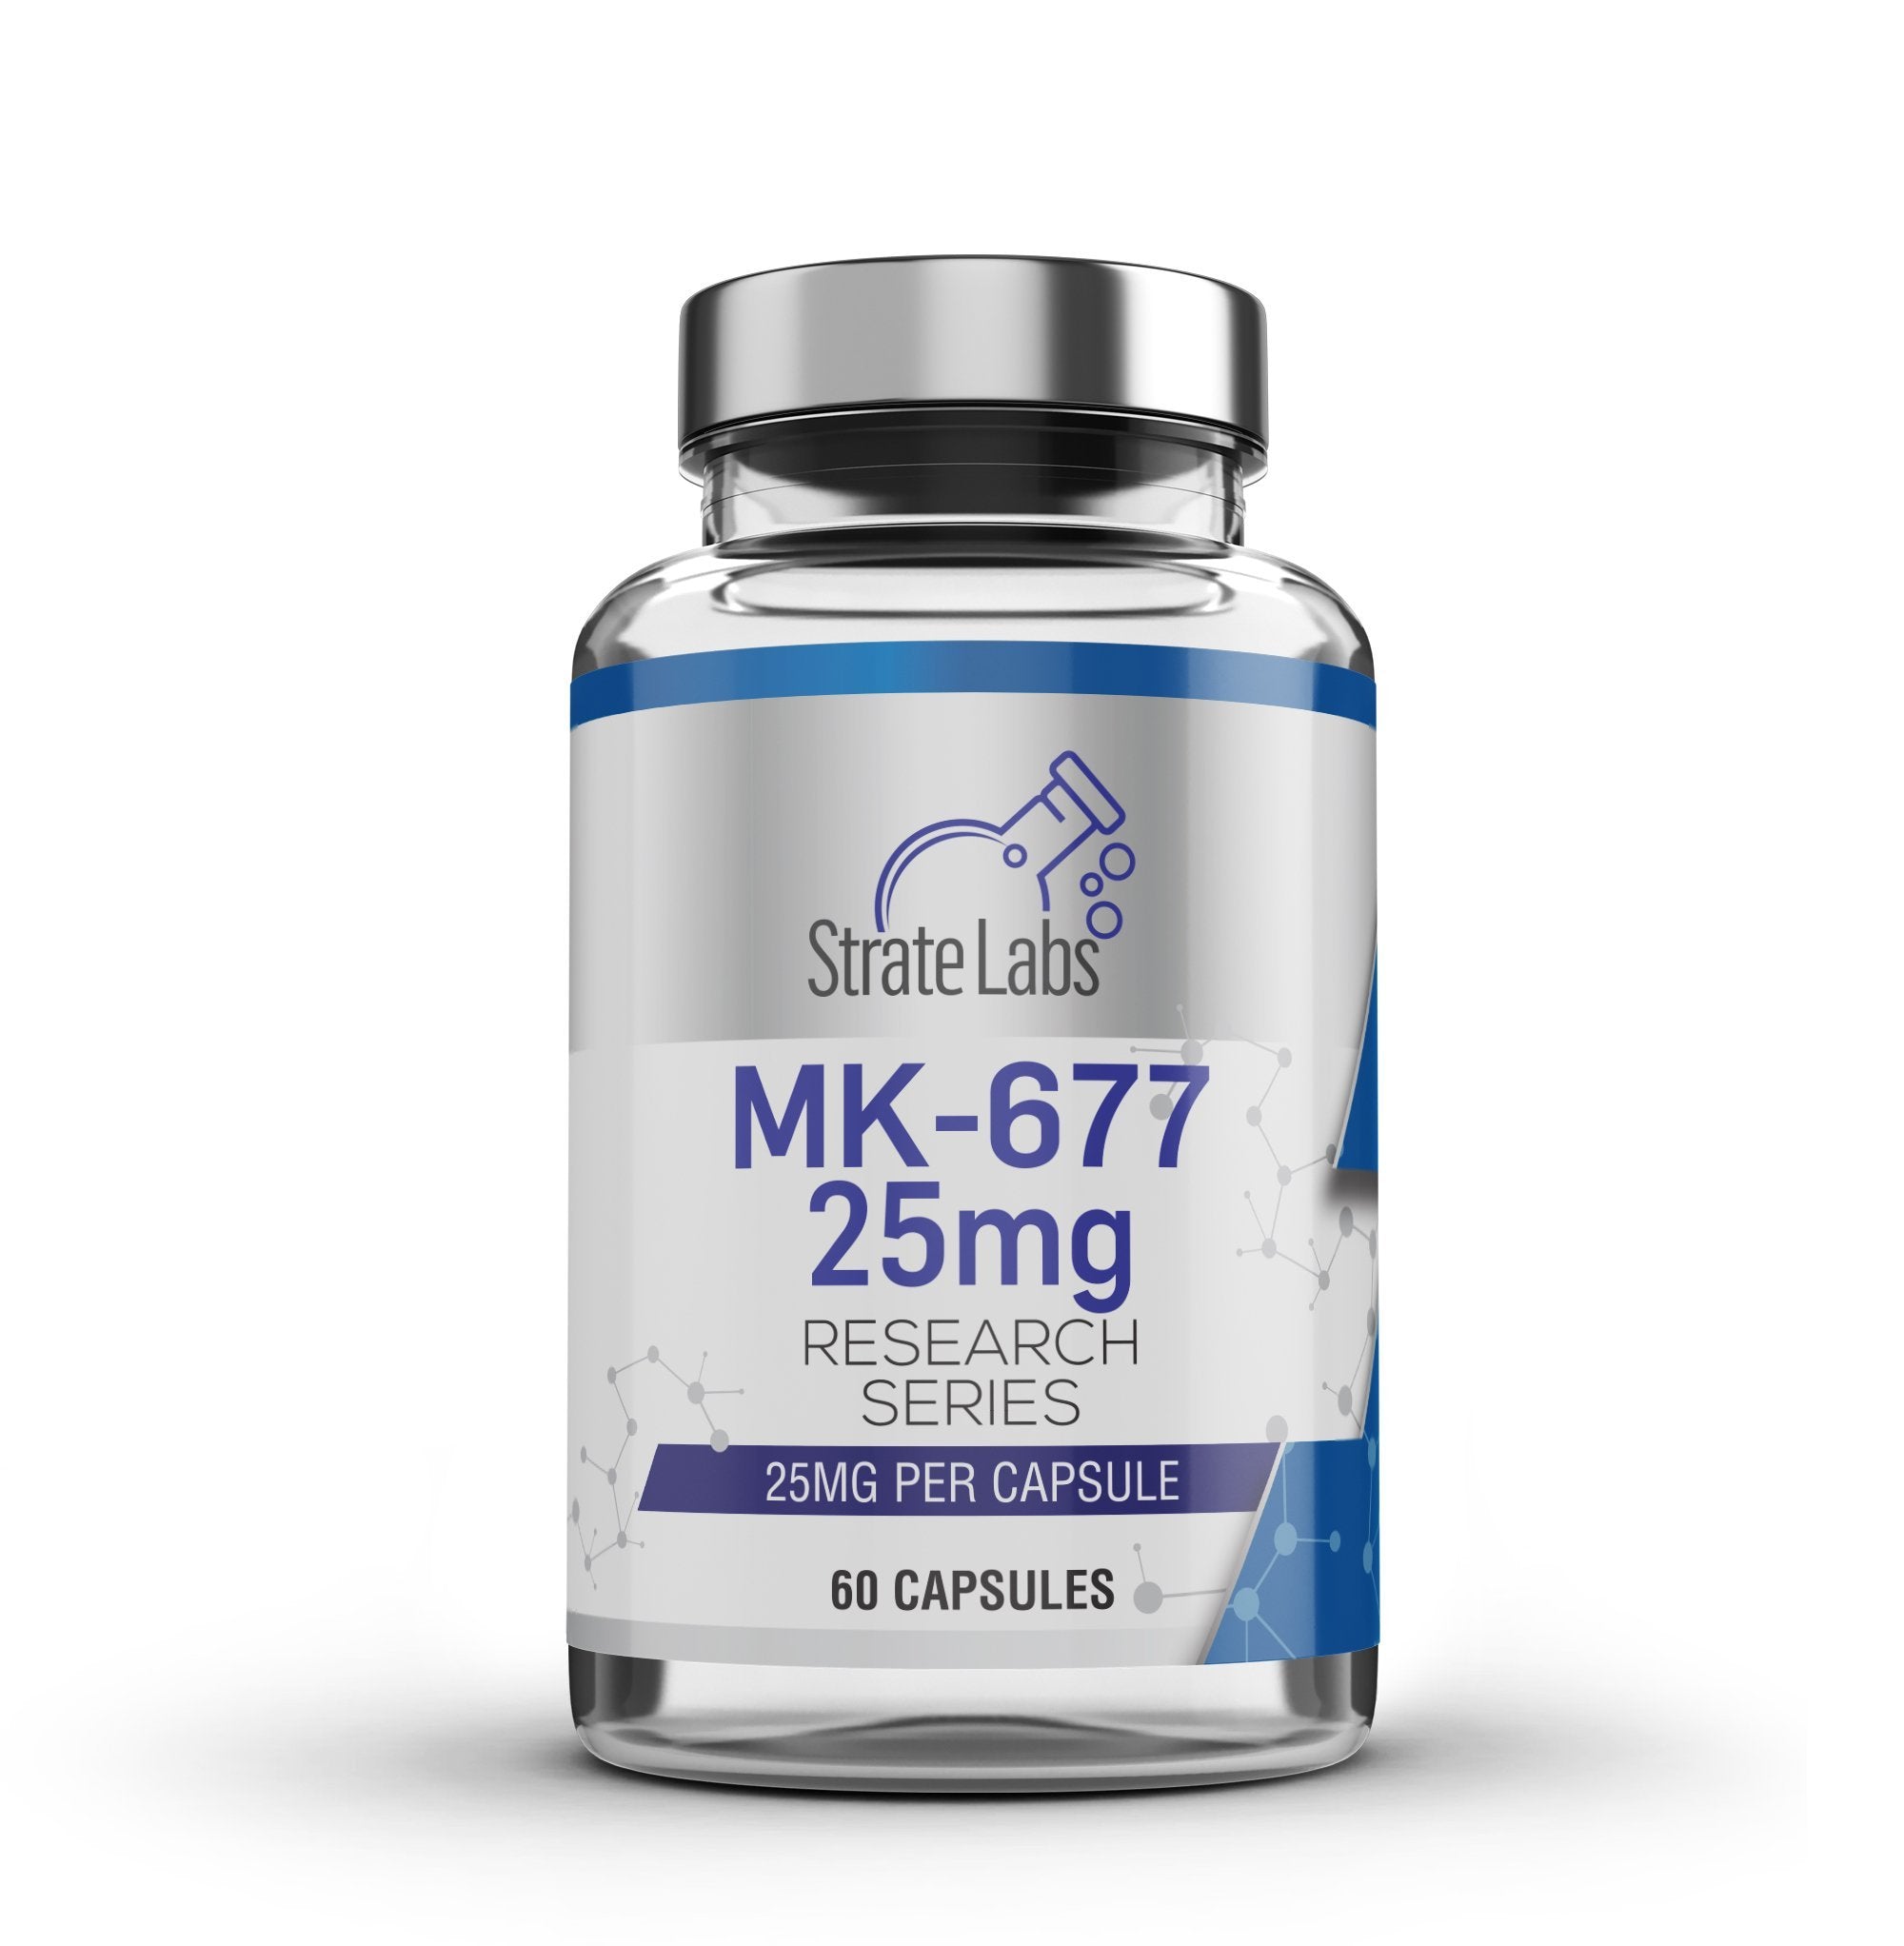 What is MK677?